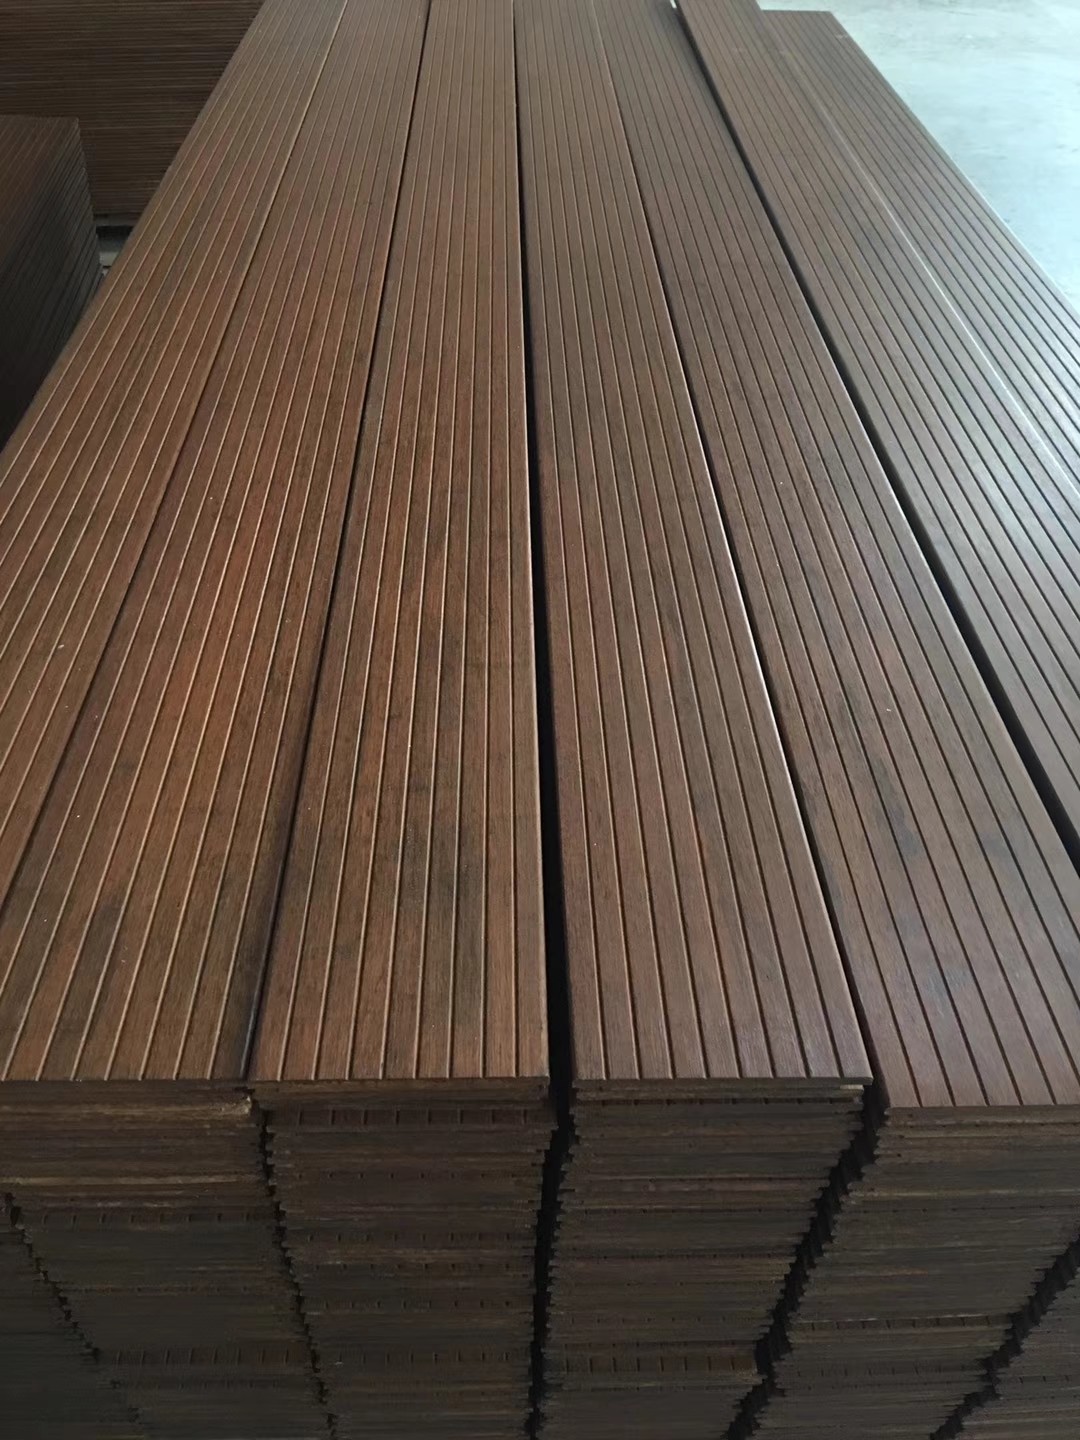 Strand Woven Bamboo Lumber for Bridege Outdoor Decking Suppliers